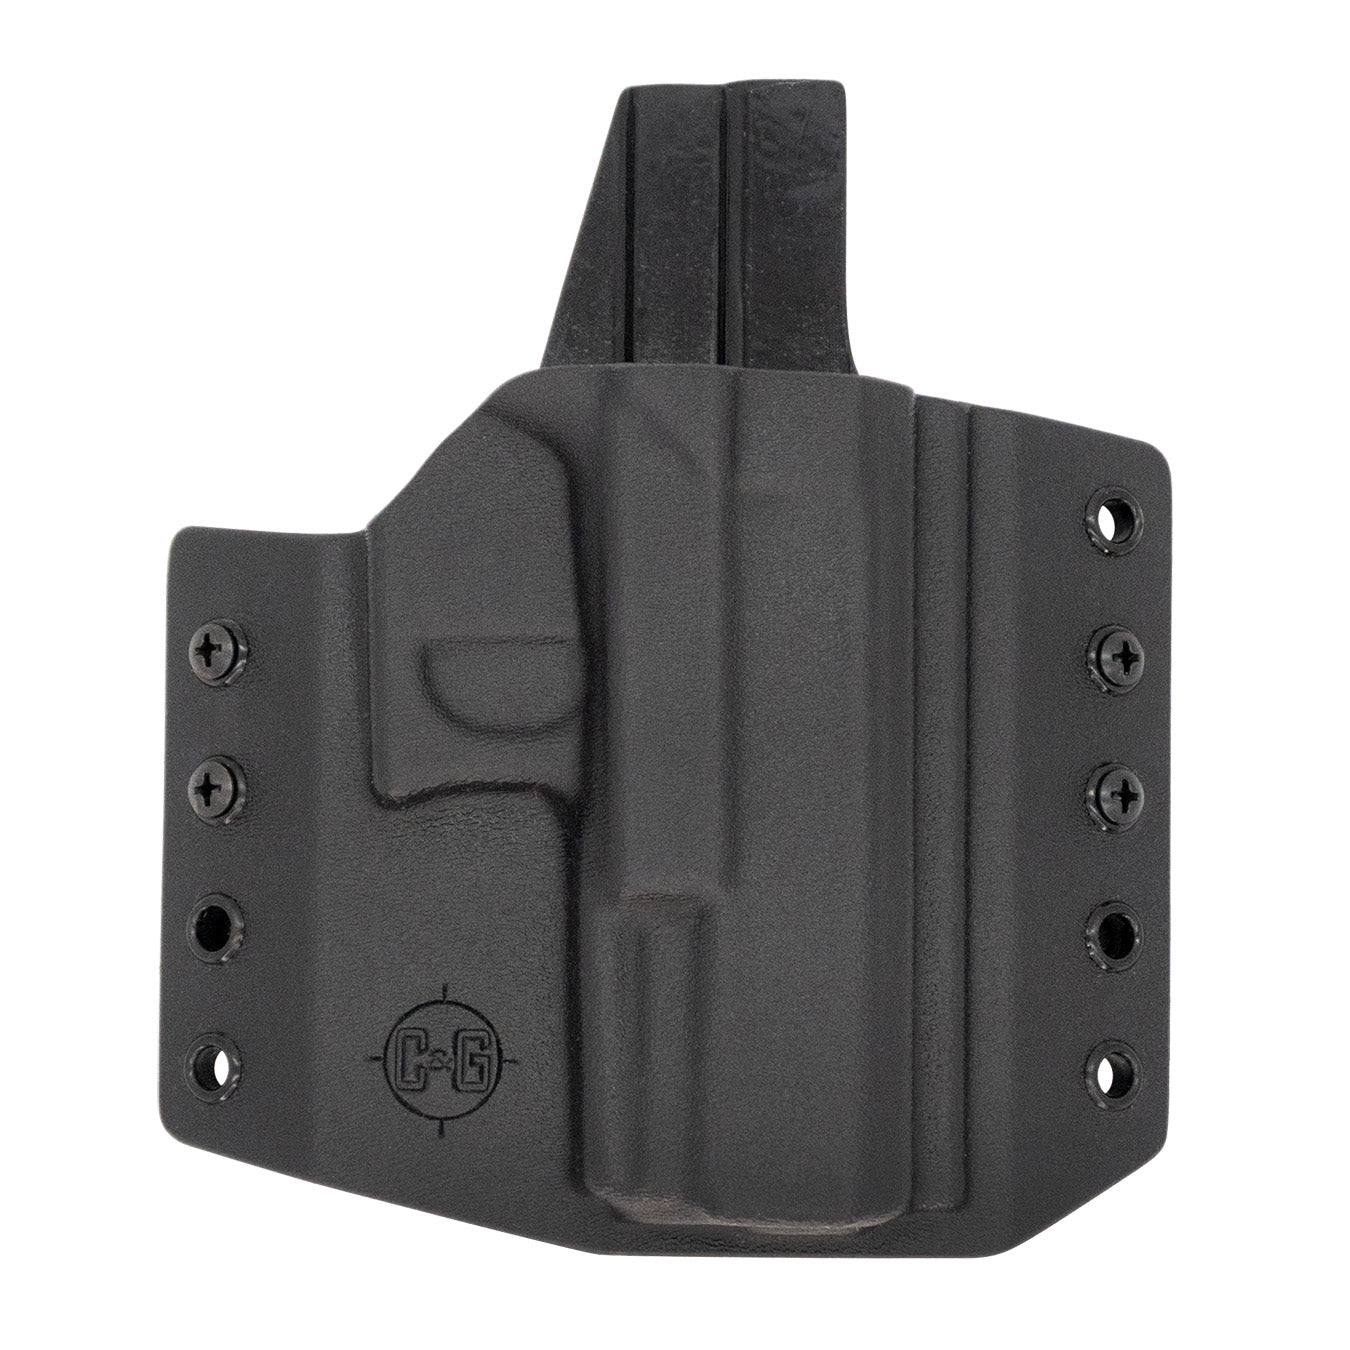 This is the custom C&G Holsters outside the waistband holster for a Glock 30.